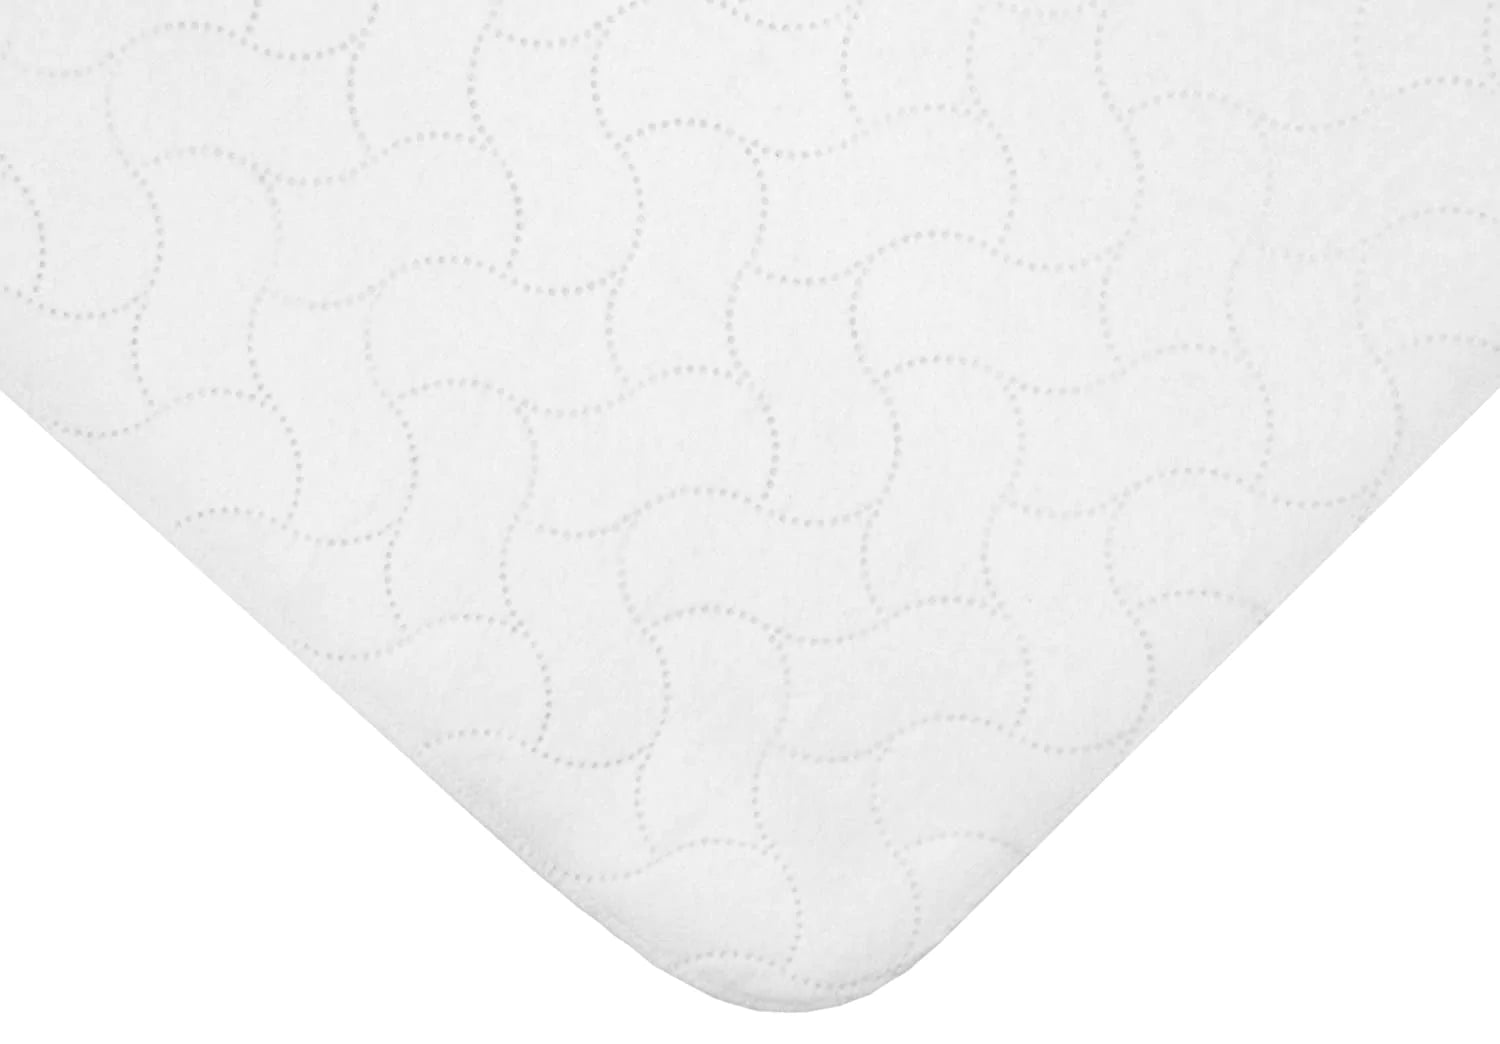 American Baby Company Waterproof Reusable Embossed Quilt-Like Flat Crib Protective Mattress Pad Cover for Babies, Adults and Pets, White